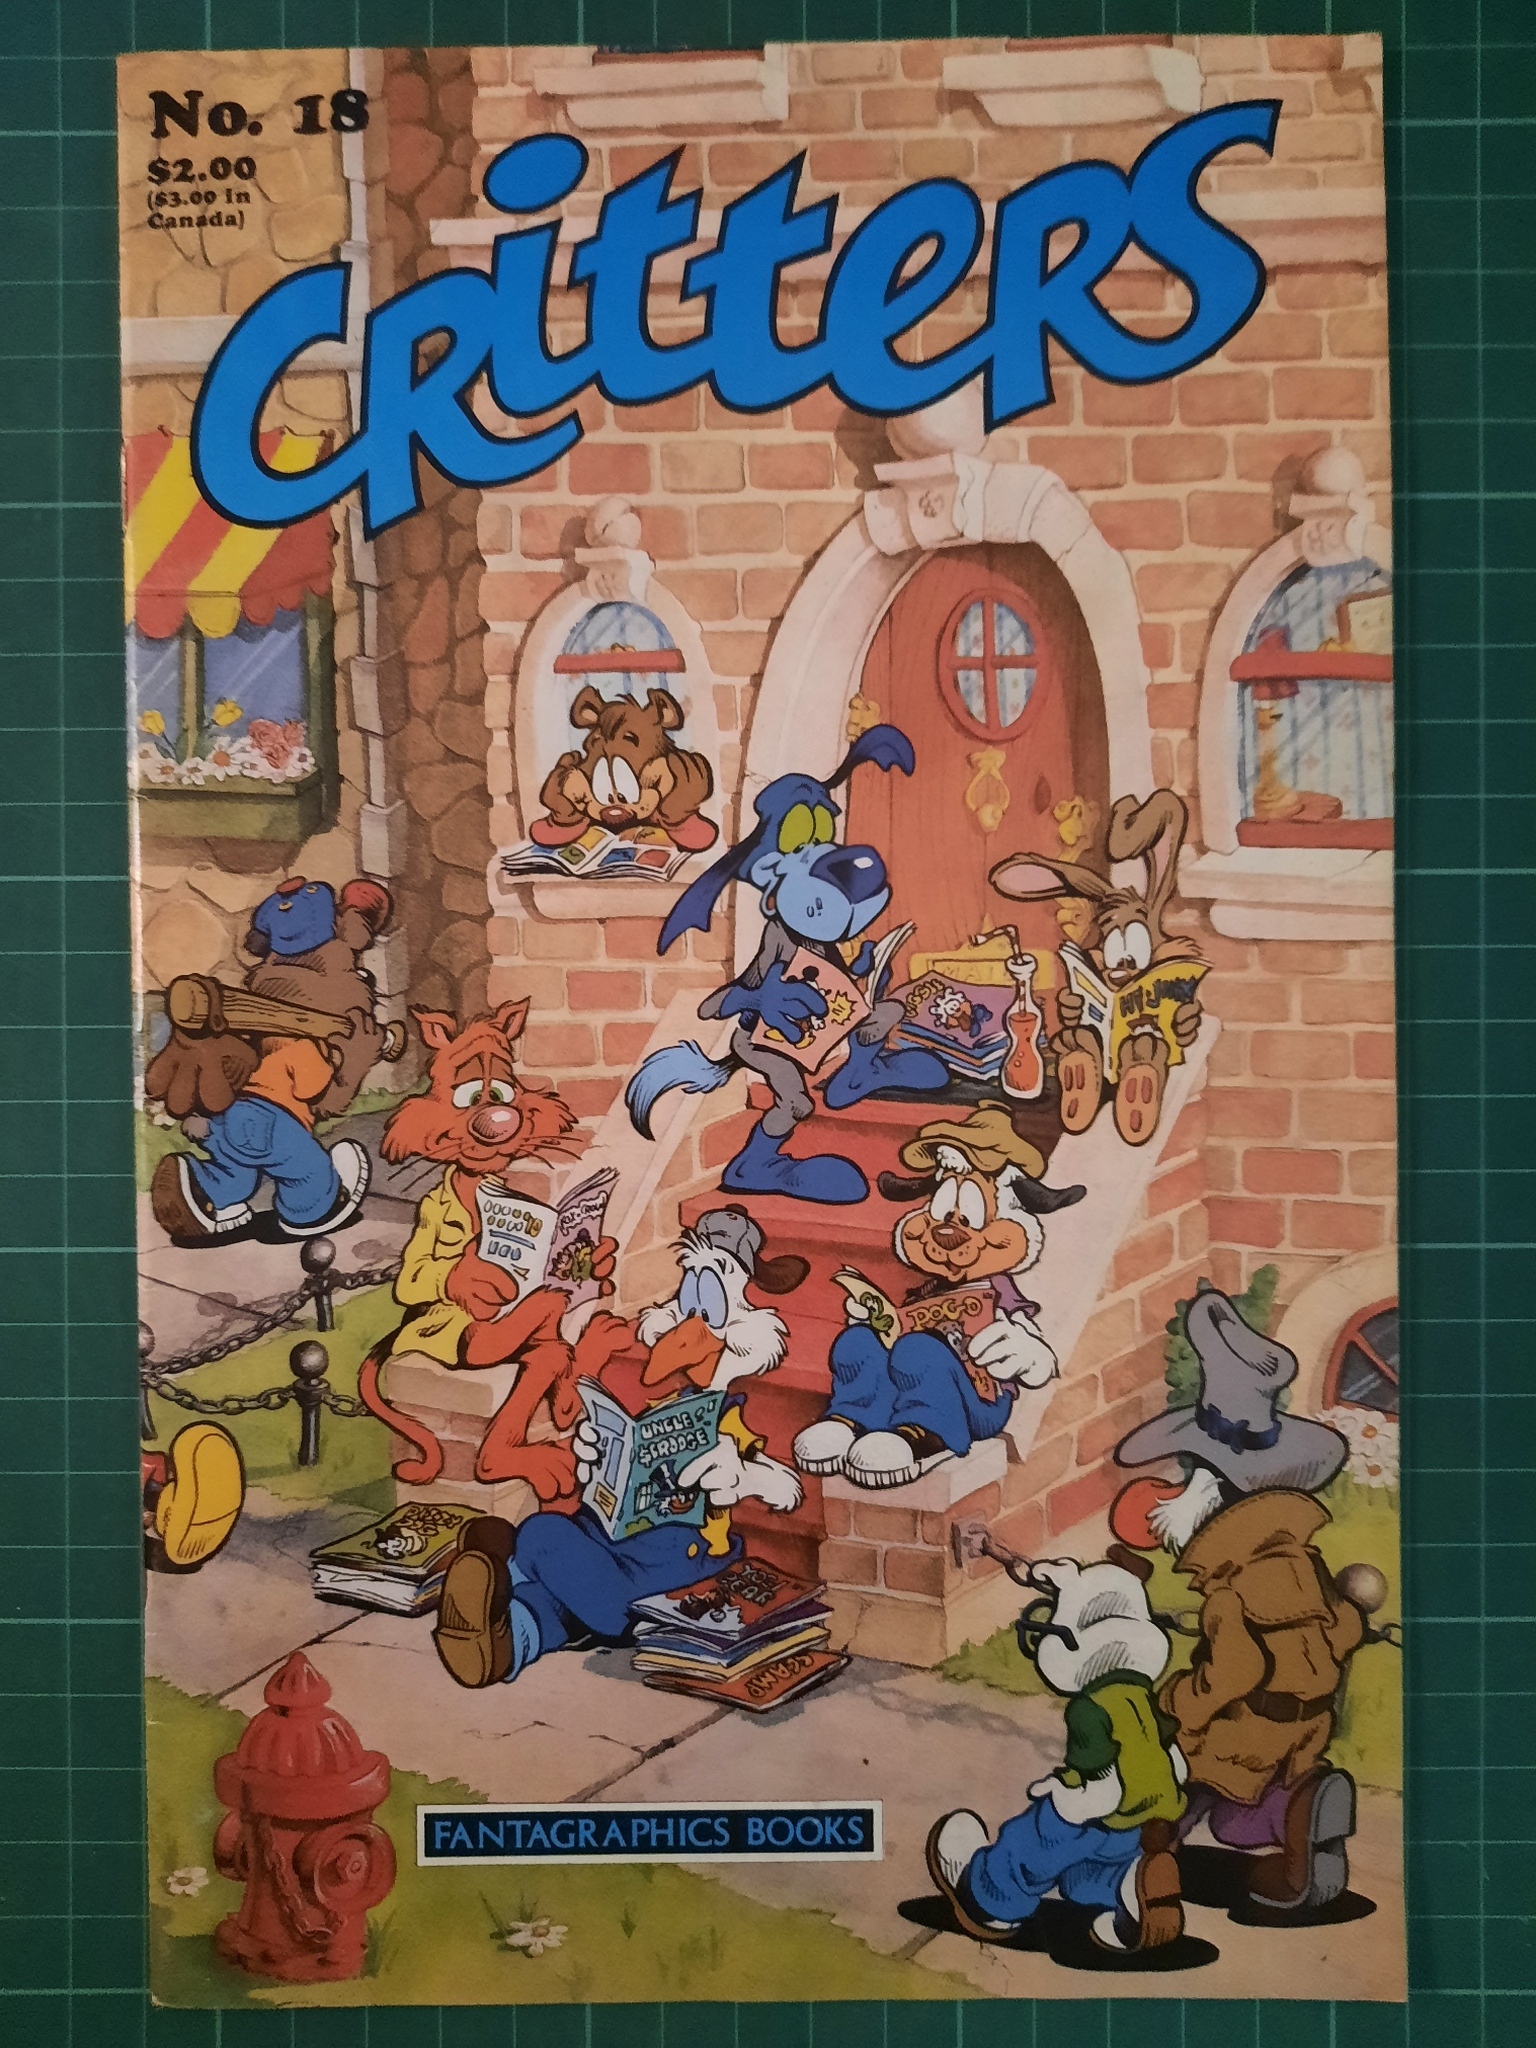 Critters #18